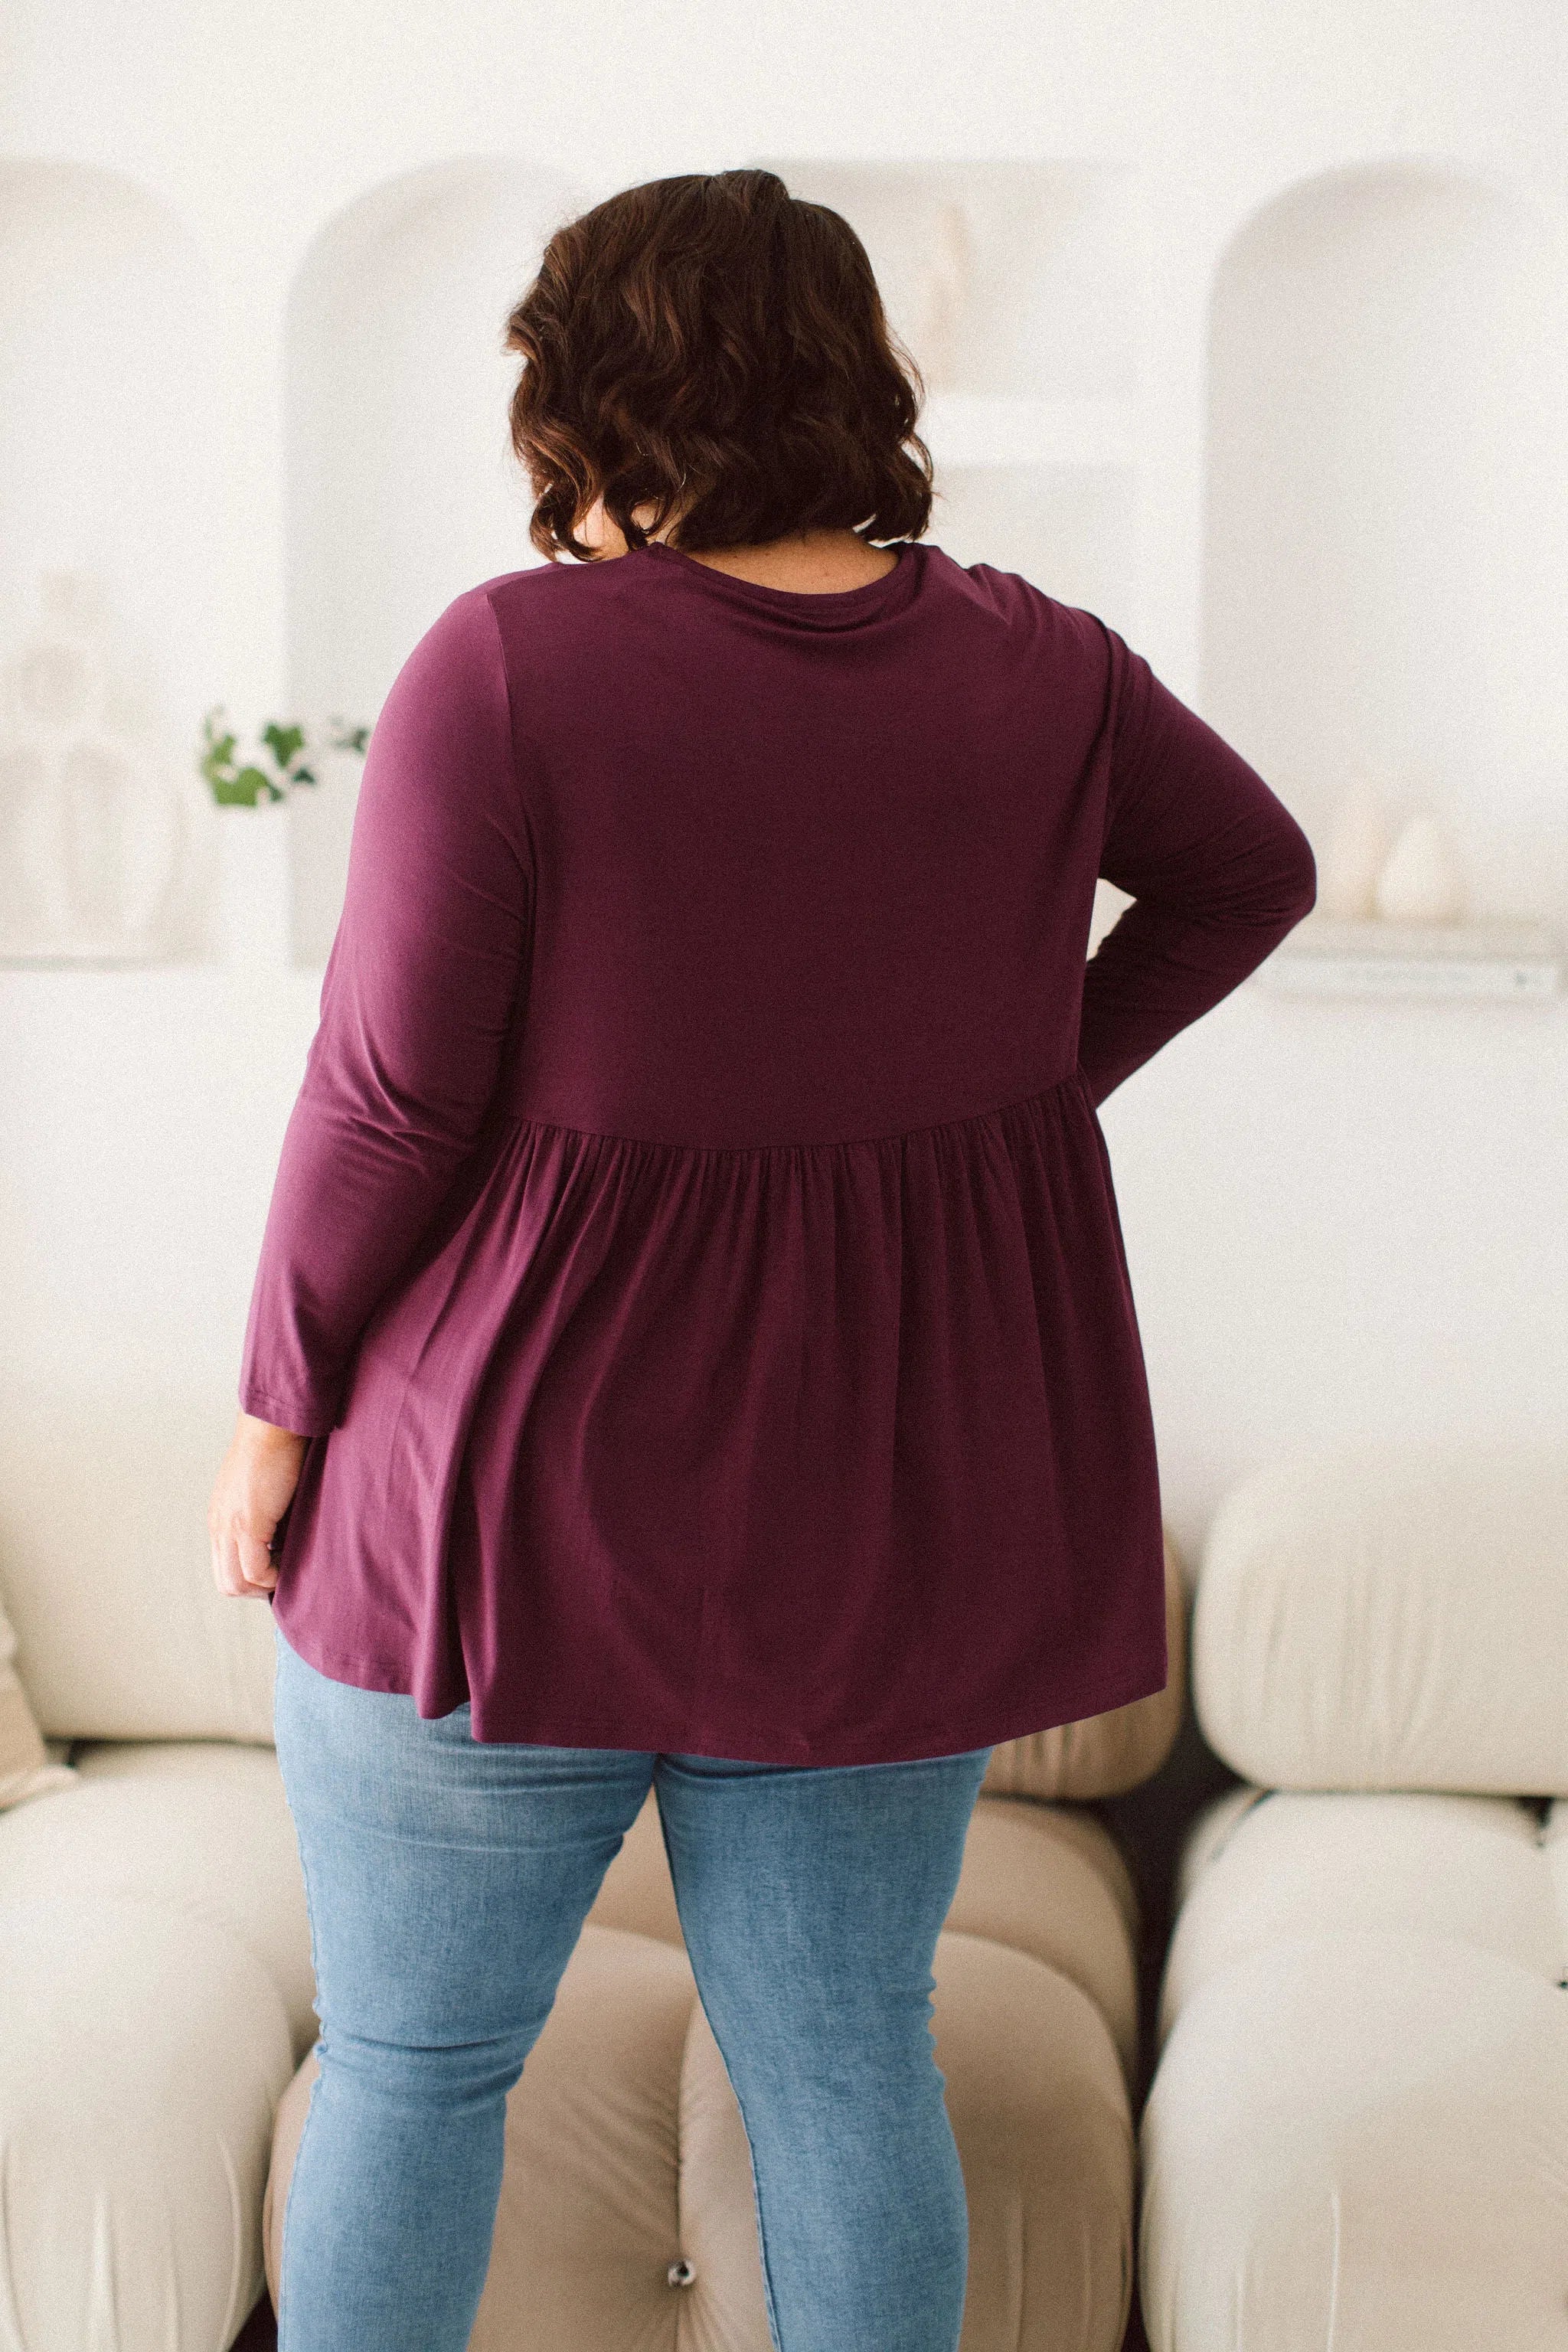 Plus Size clothing,  women modeling a Curvy Womens shirt, Lucy Long Sleeve Top in Purple berry